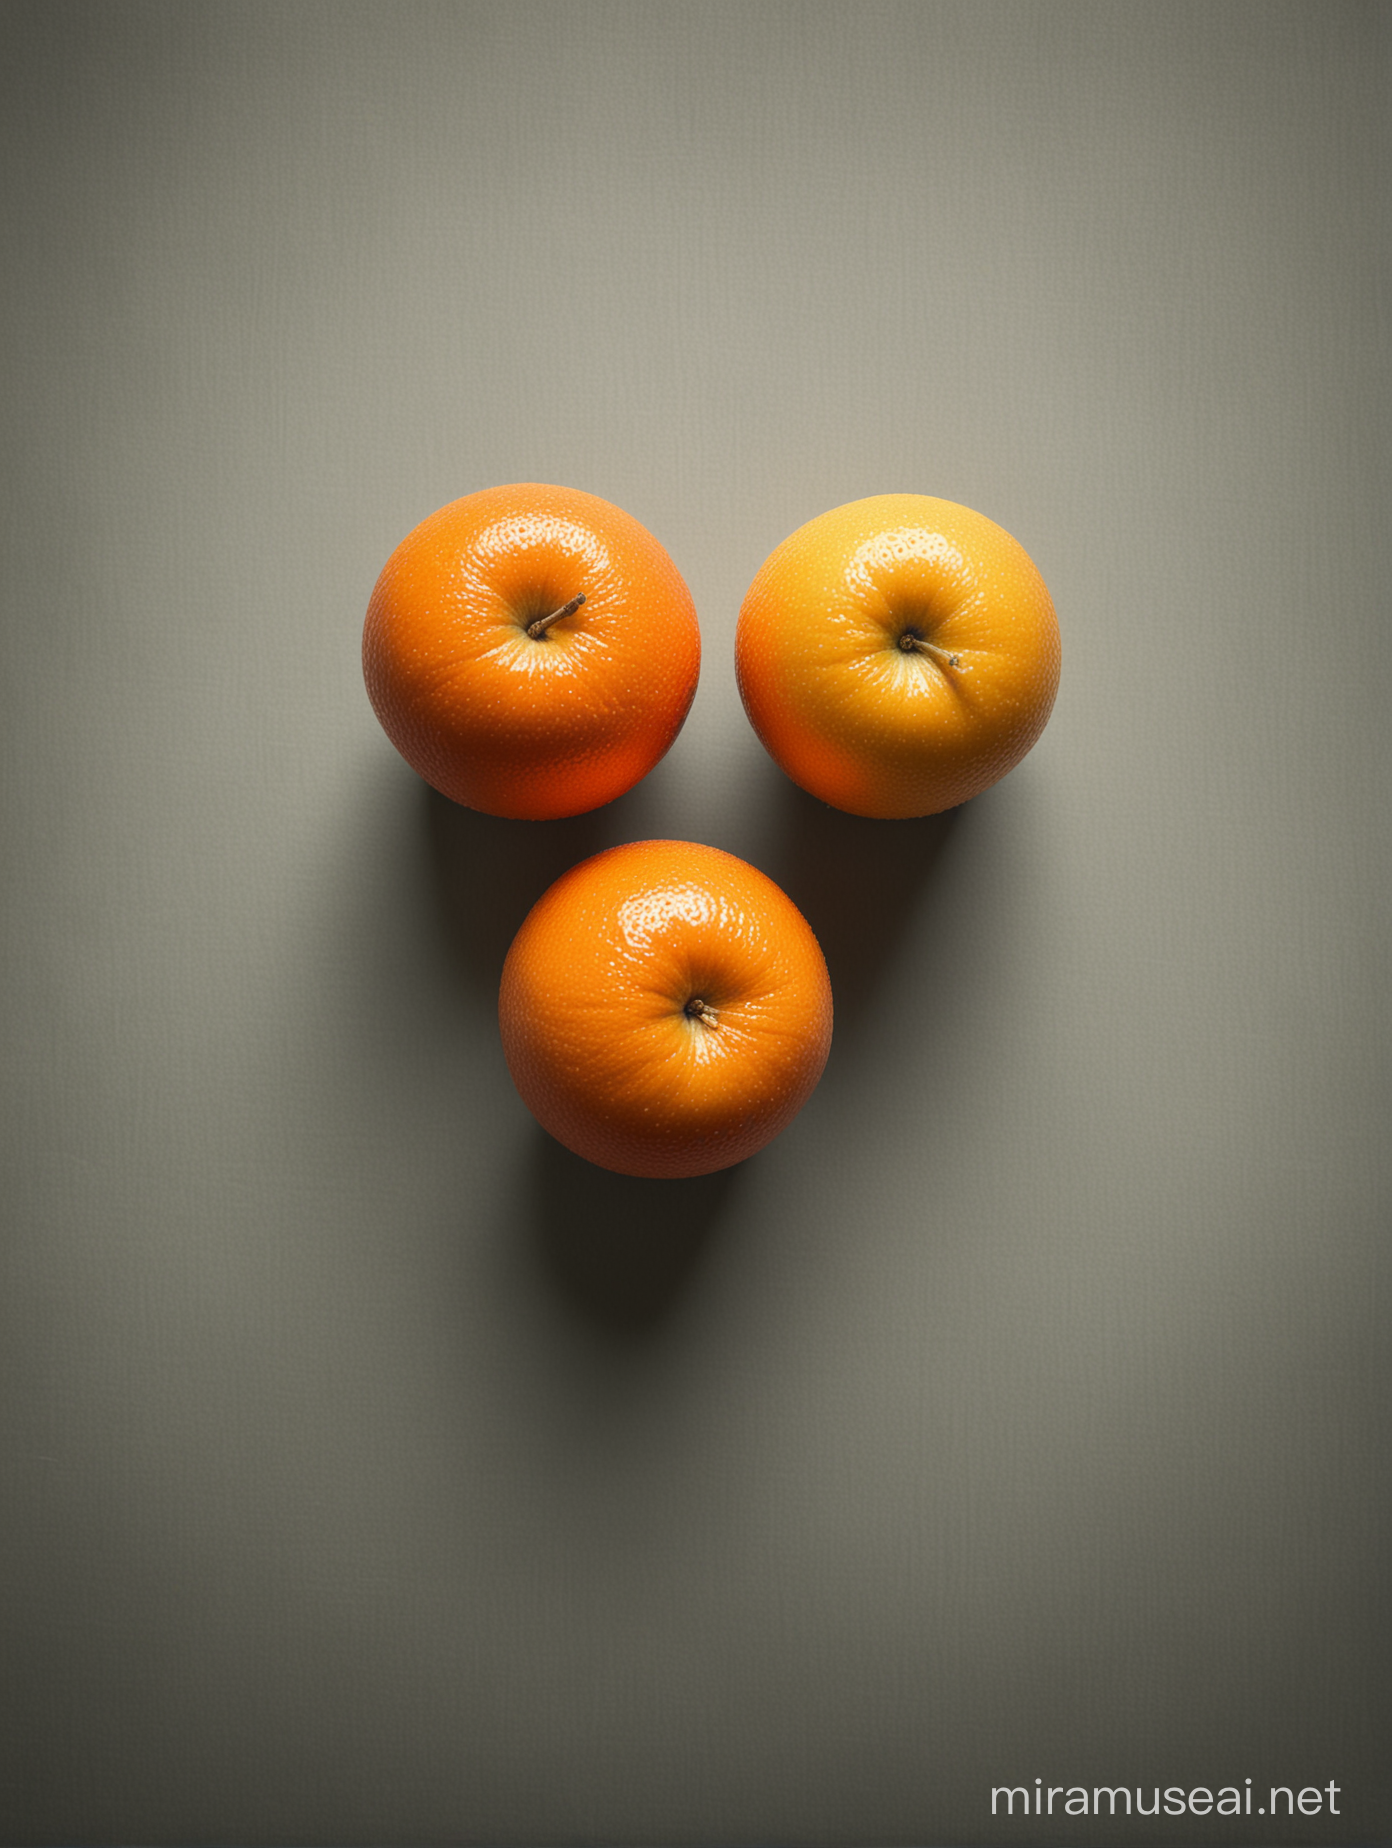 one apple and two oranges